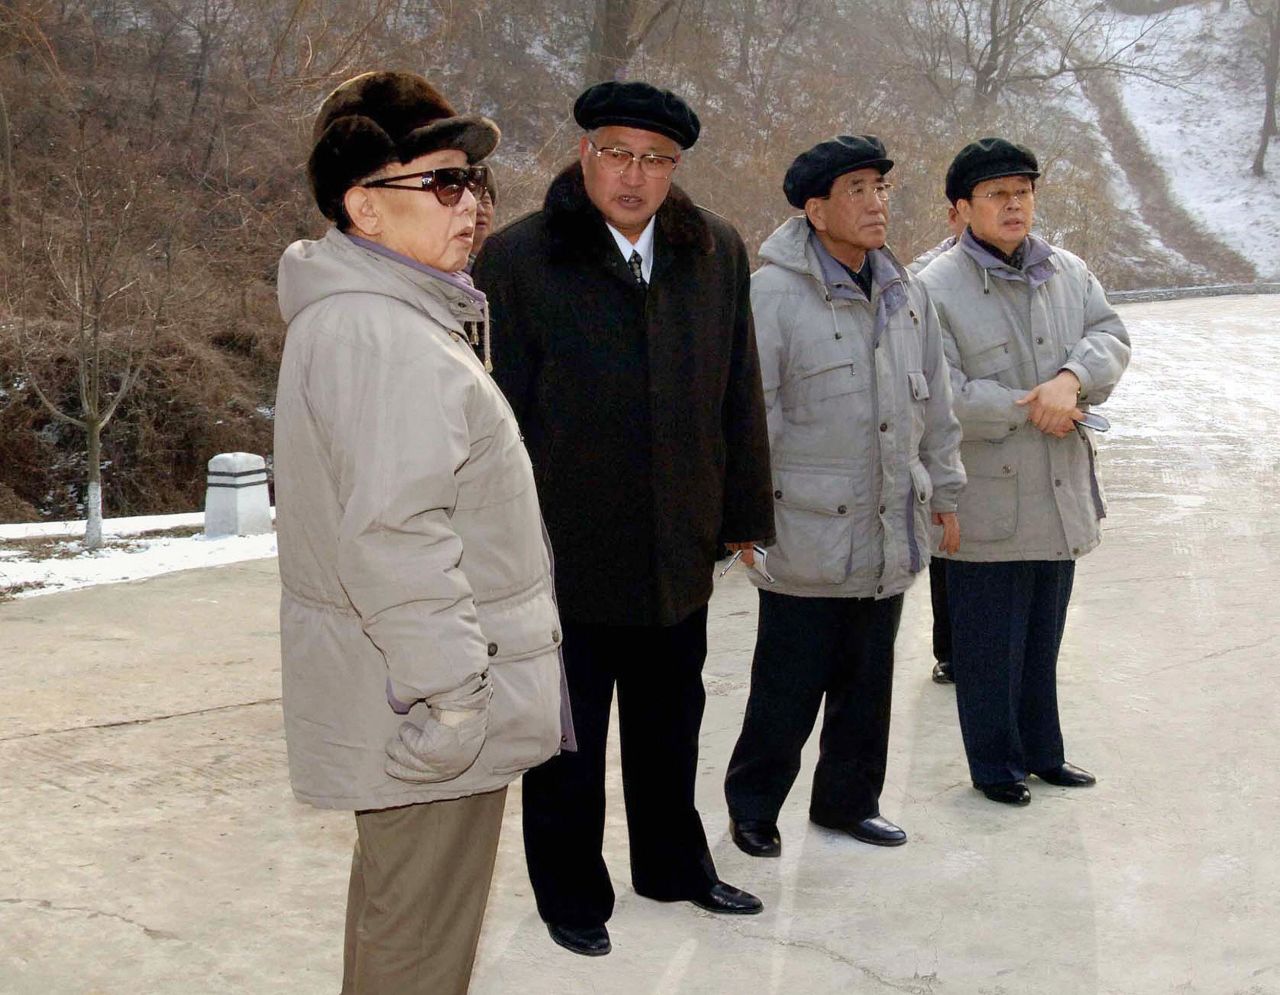 Jang, far right, appeared with Kim Jong Il and other officials during an inspection of the Mt. Ryongak Recreation Ground in Pyongyang, in an image released on January 18, 2009, by the official Korean Central News Agency.   